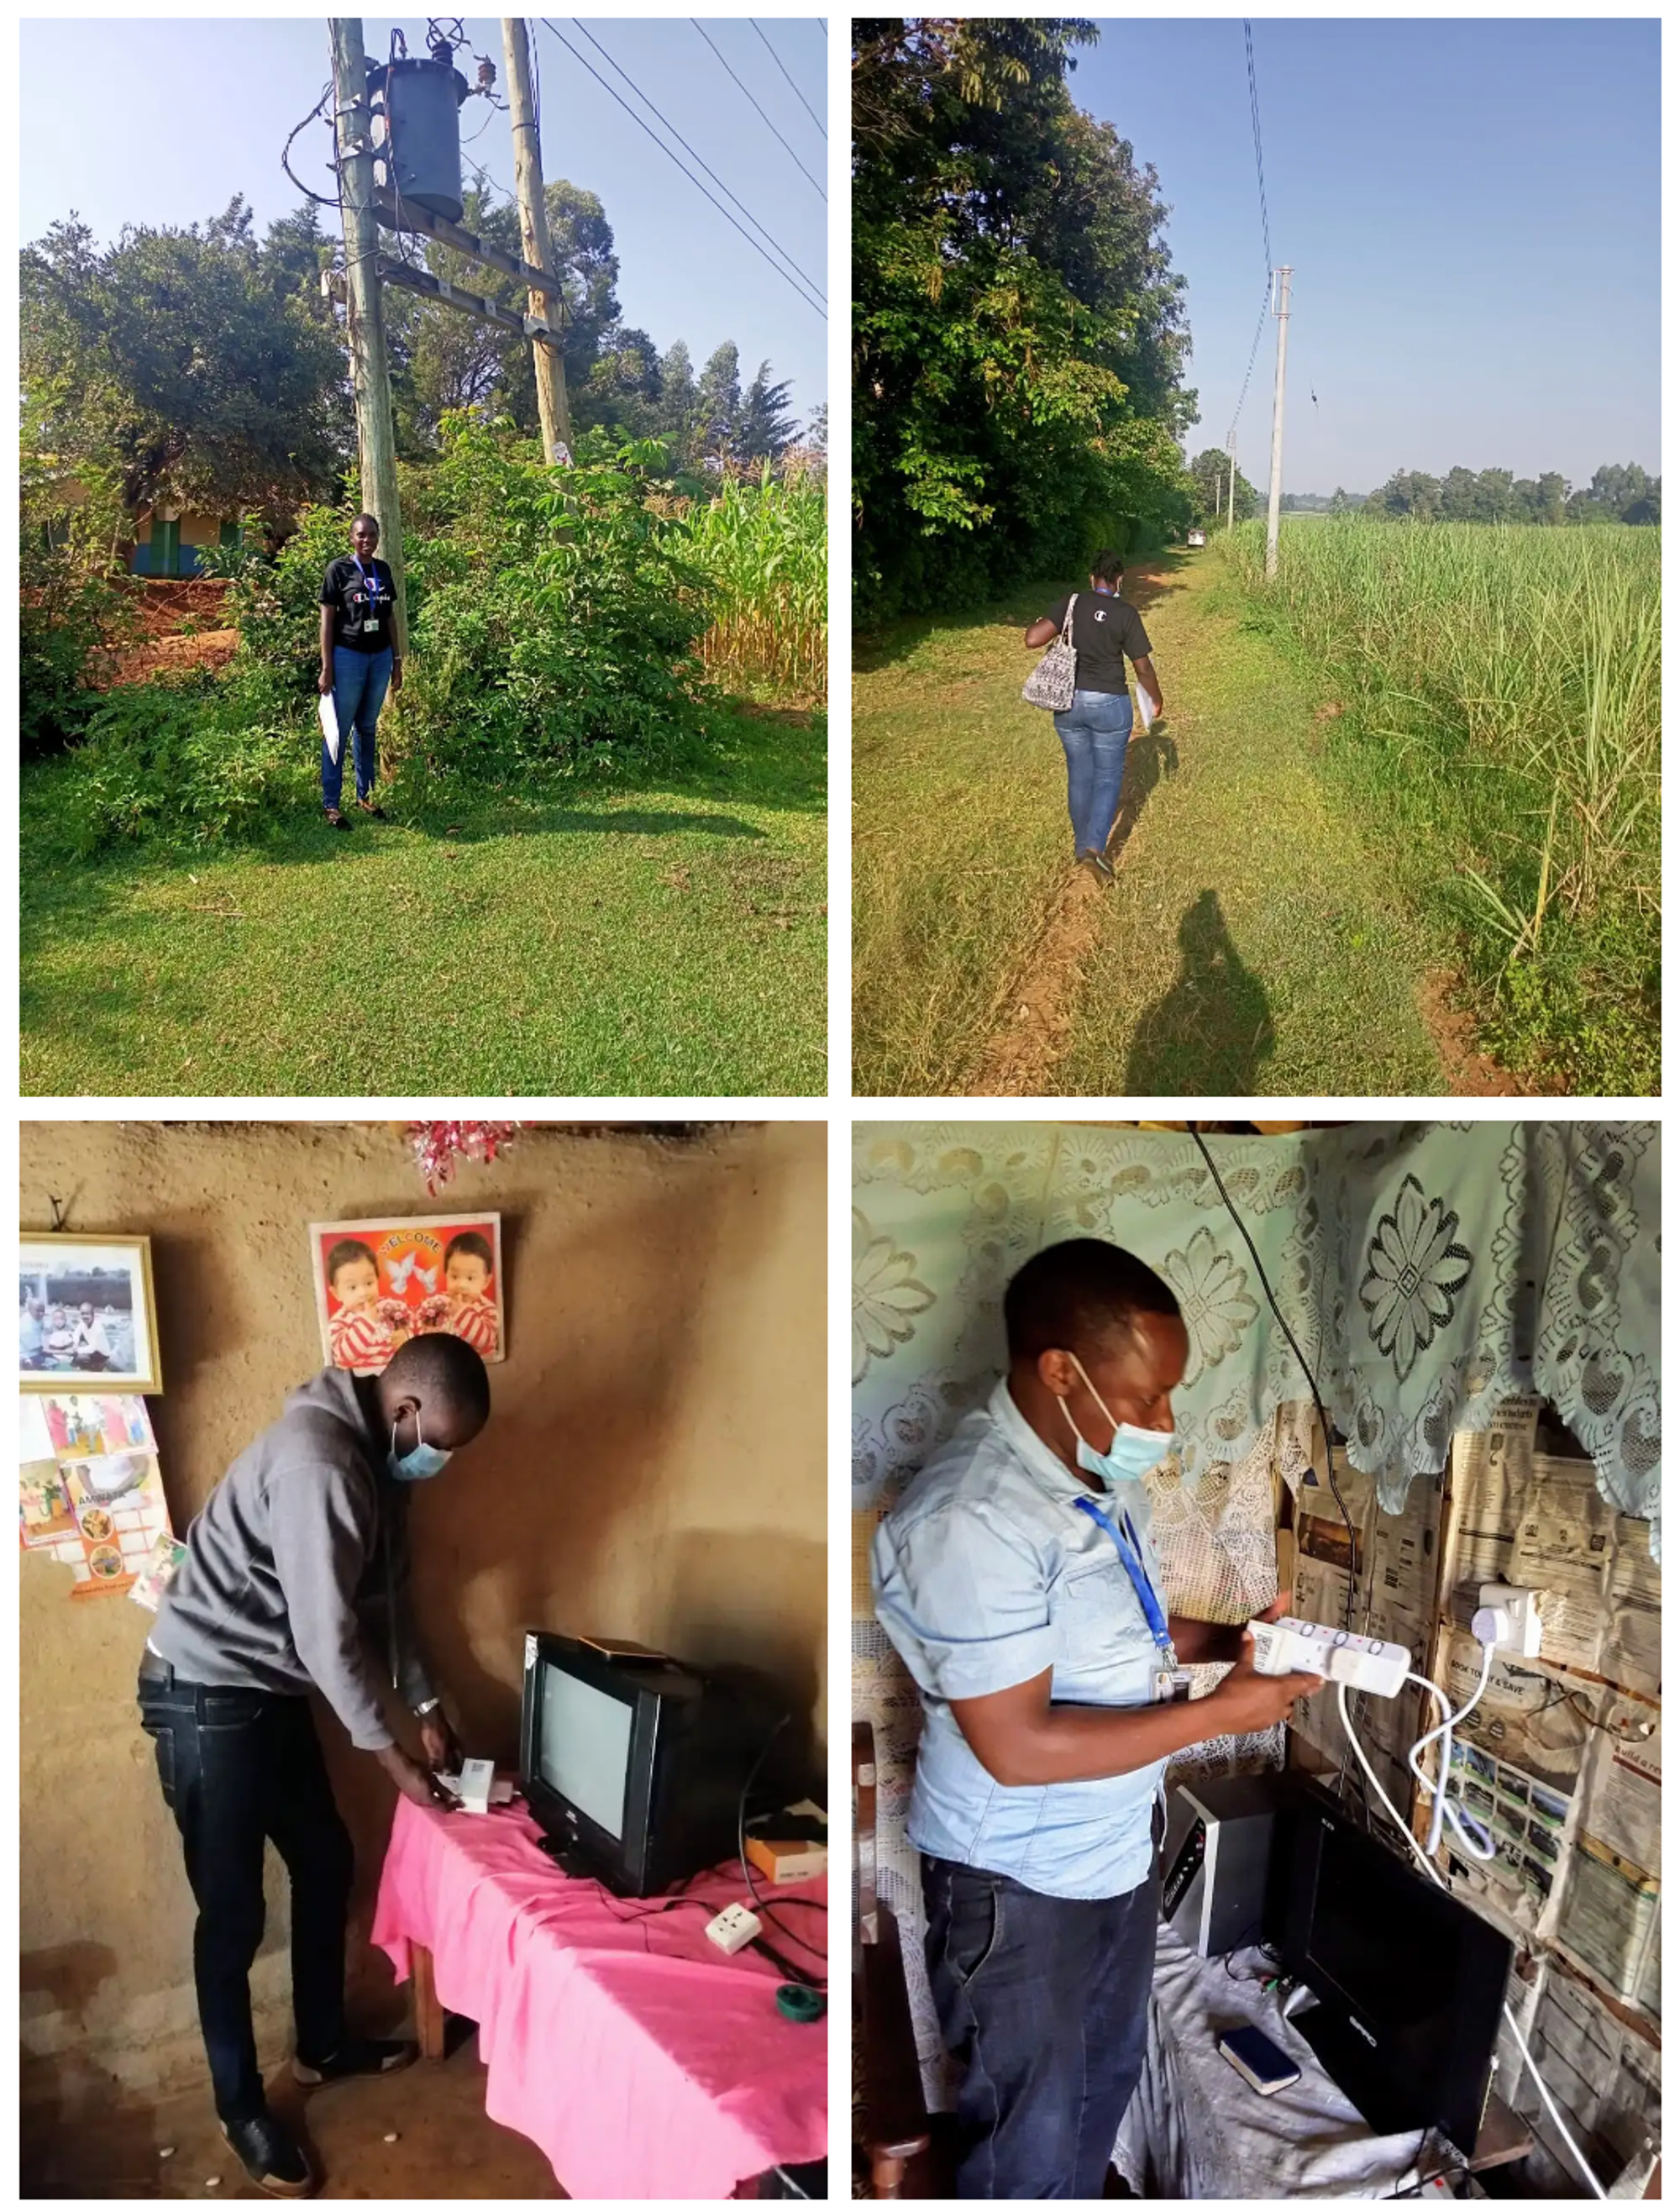 Figure 1: Locating central transformers and installing sensors. In each LMCP village sampled for this study, the project team first located the central transformer (top left). Then, the team walked along the low-voltage line network (top right) to locate eligible households for sensor installation (bottom photos). The distance of the household along the LV network line was recorded so researchers could study whether the distance of a household from the central transformer affects voltage quality experienced by that household.